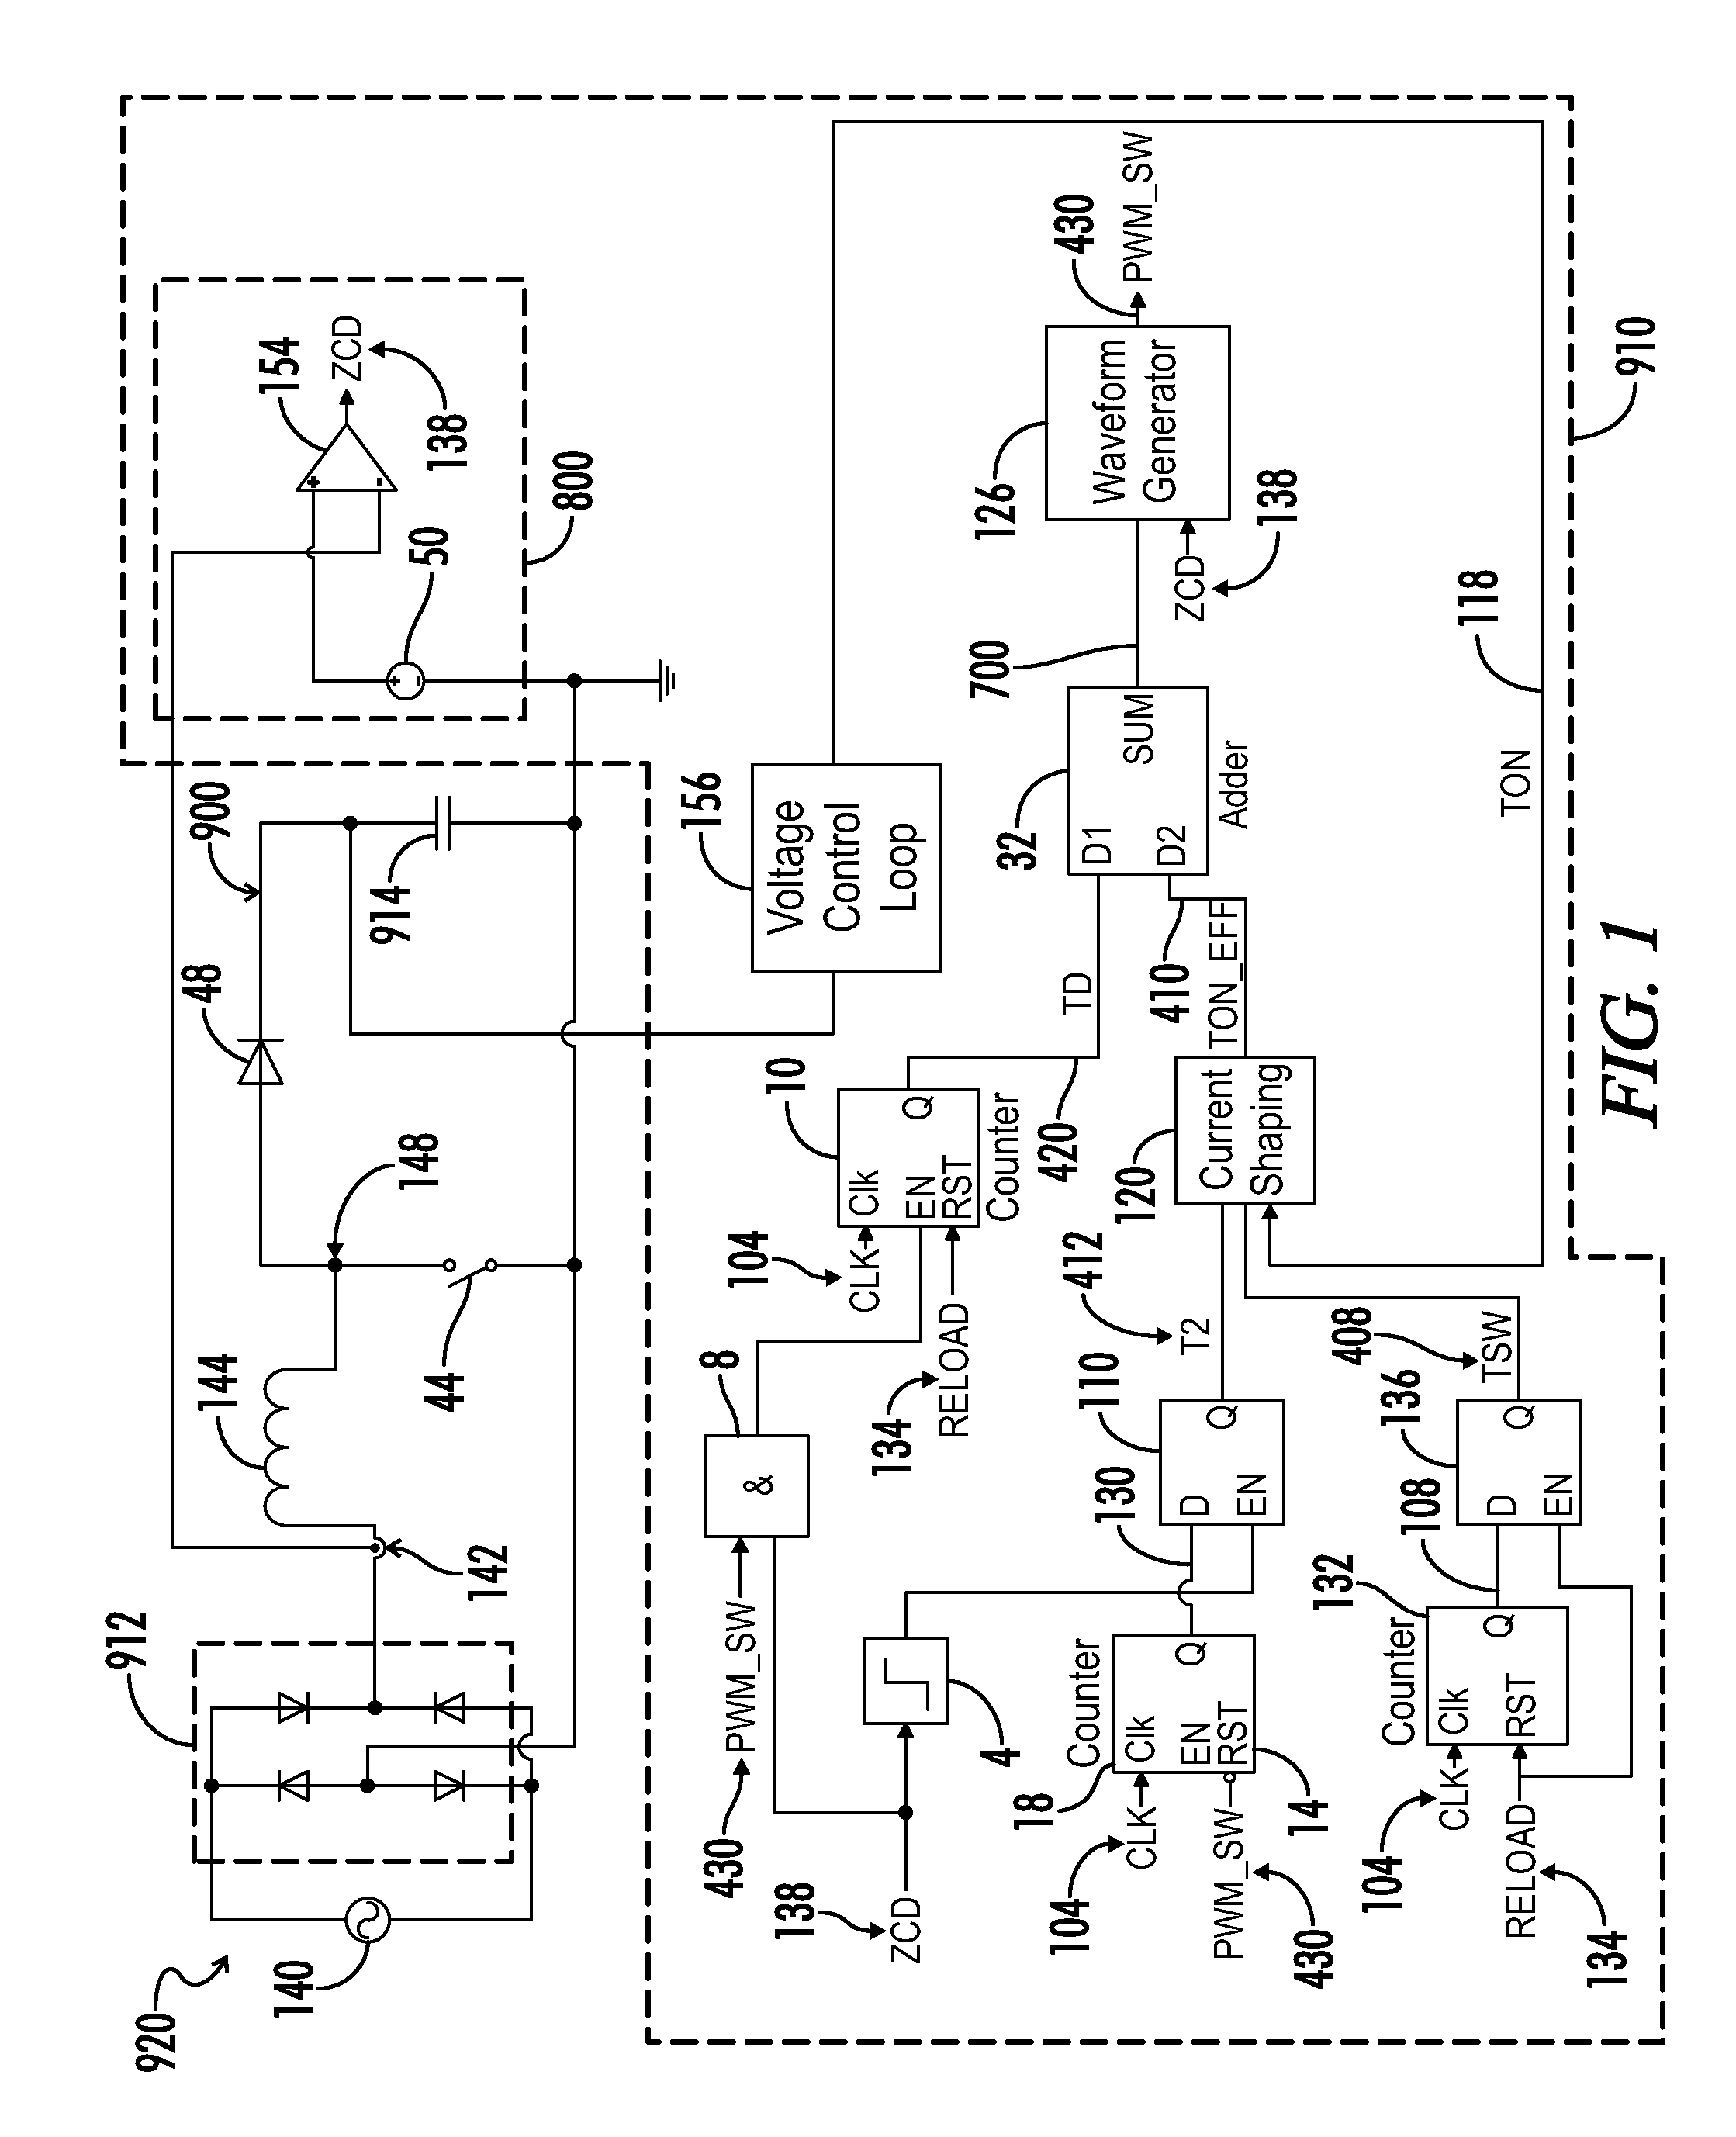 Input current shaping for transition and discontinuous mode power converter